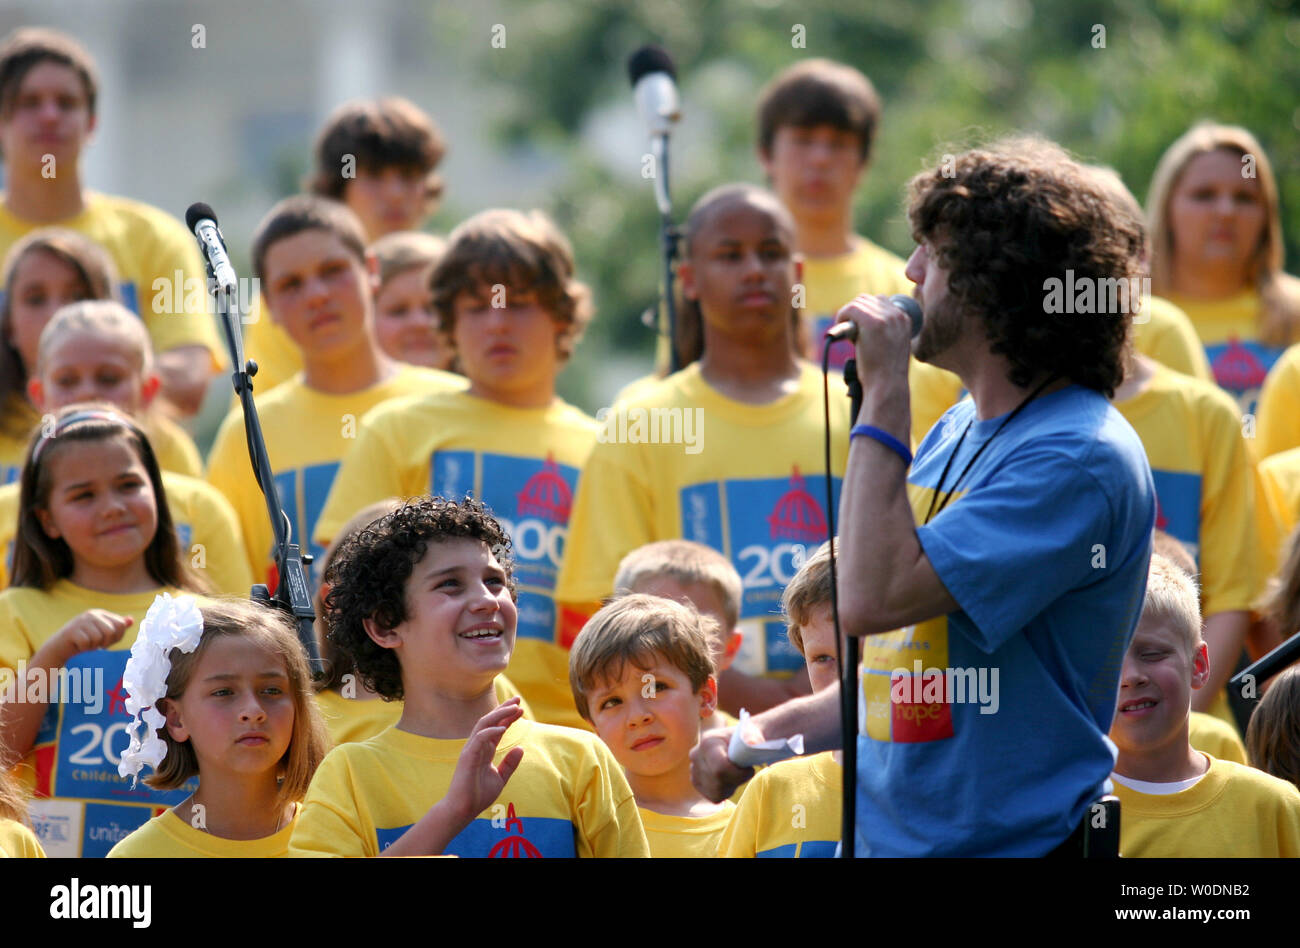 2006 American Idol Finalist Elliott Yamin (R) and 150 children/delegates perform the song, 'Promise to Remember Me' on Capitol Hill in Washington on June 18, 2007. The Juvenile Diabetes Research Foundation held it's 'Children's Congress 2007' in an effort to raise awareness in Congress. (UPI Photo/Dominic Bracco II) Stock Photo